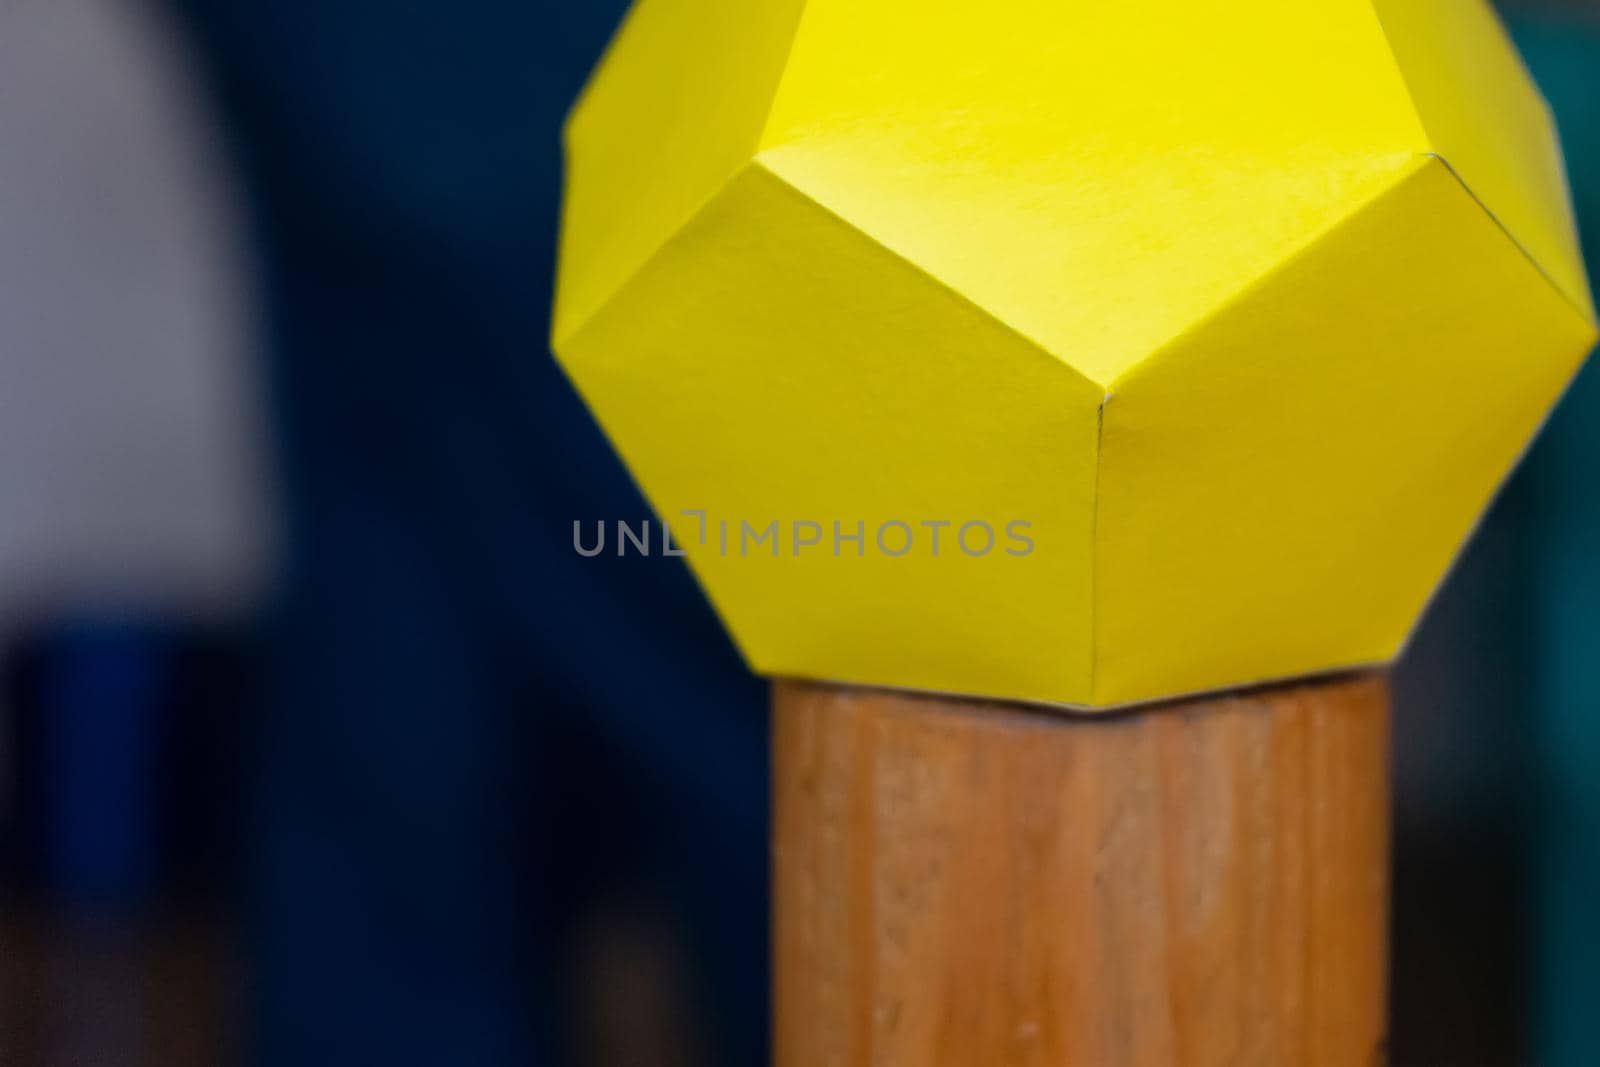 The multifaceted yellow figure is made of many yellow paper pentagons on a wooden stand by Serhii_Voroshchuk